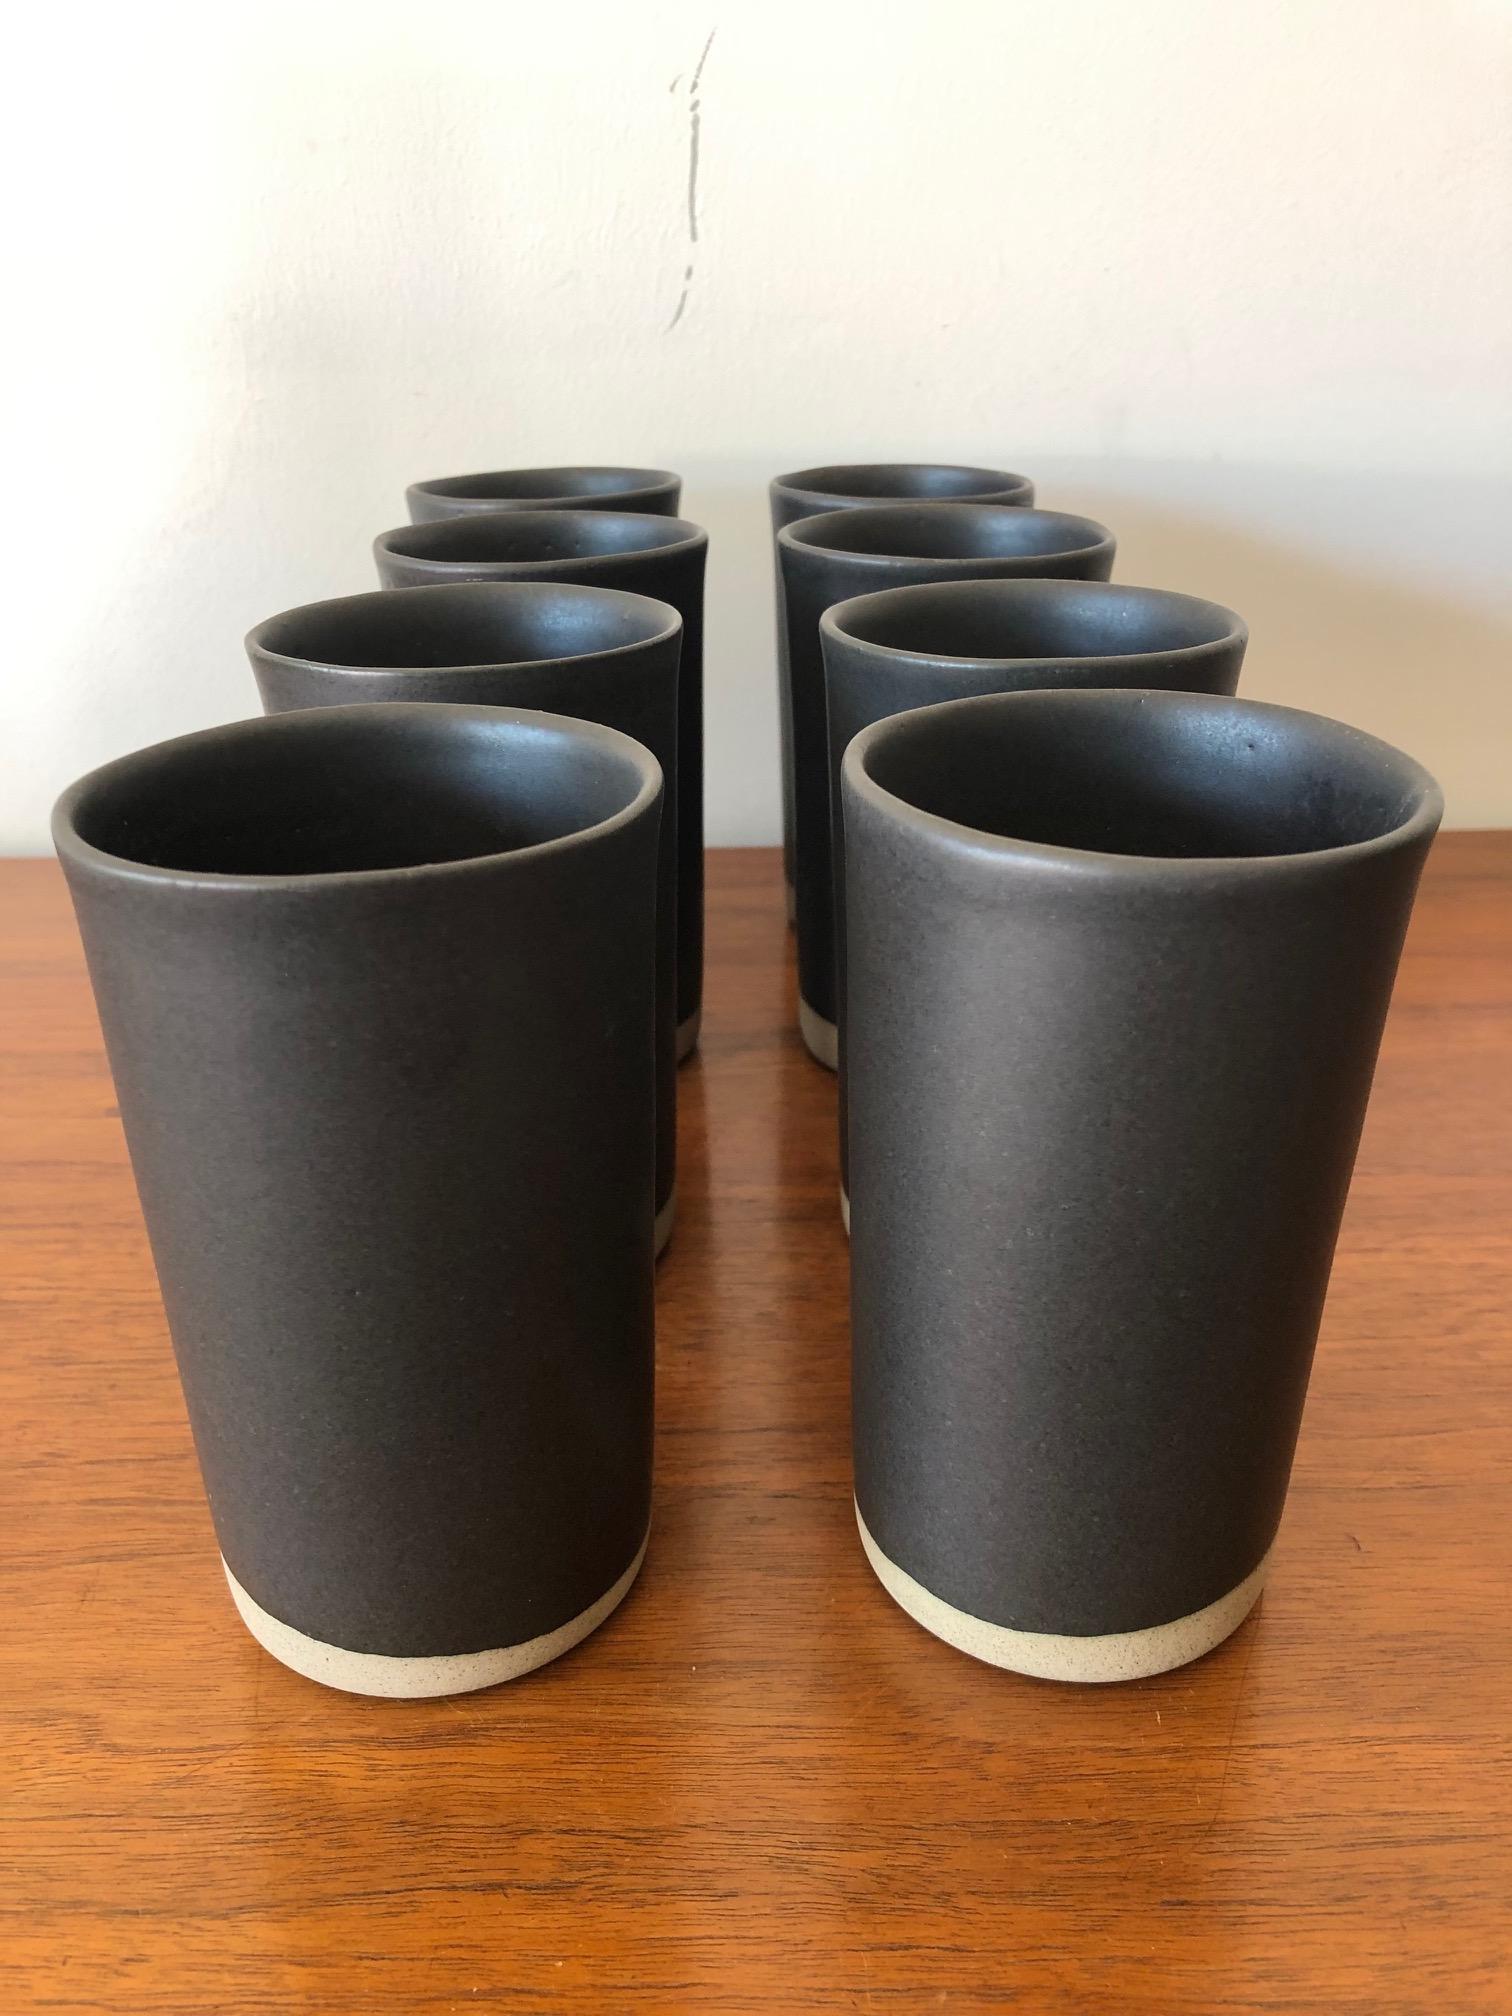 An interesting set of eight (8) ceramic cups by Gordon Martz, circa 1960s. Elegant simple form in dark espresso brown-almost black with contrasting raw natural surface on the bottom. Handmade and each slightly irregular. Measuring approx. 5.5